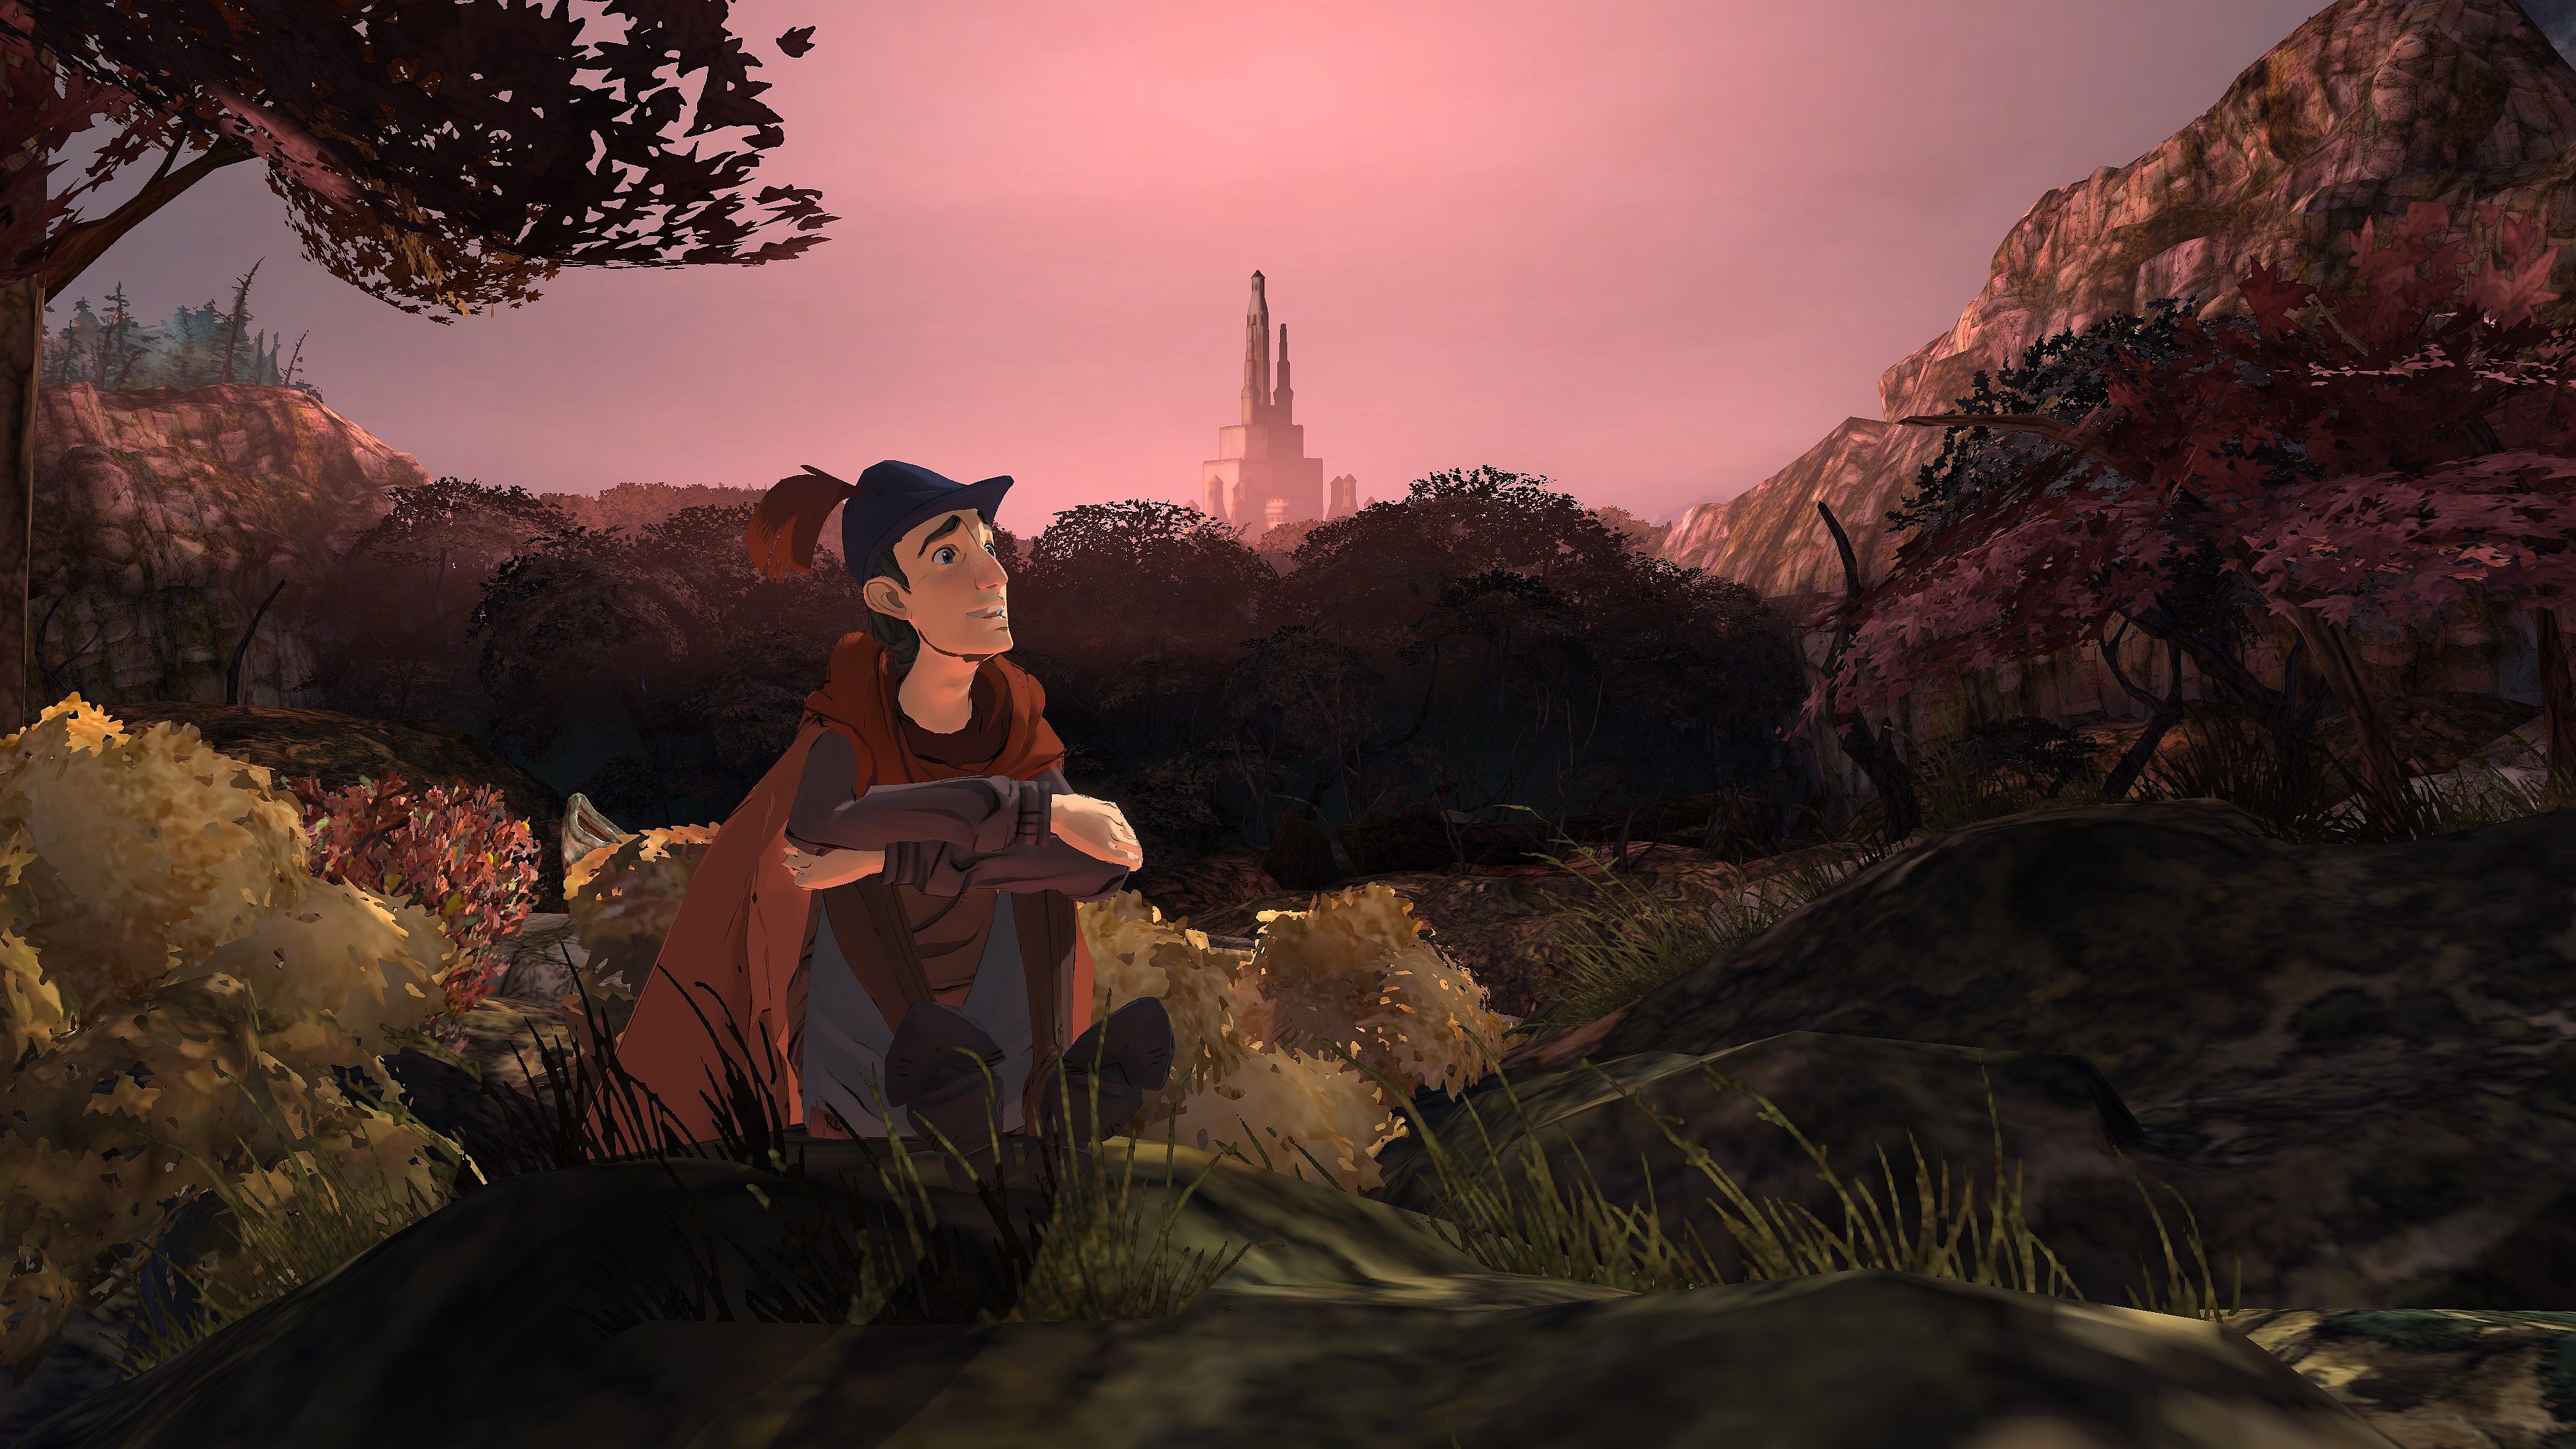 Image for King's Quest: A Knight to Remember is out, PS4 users report issues